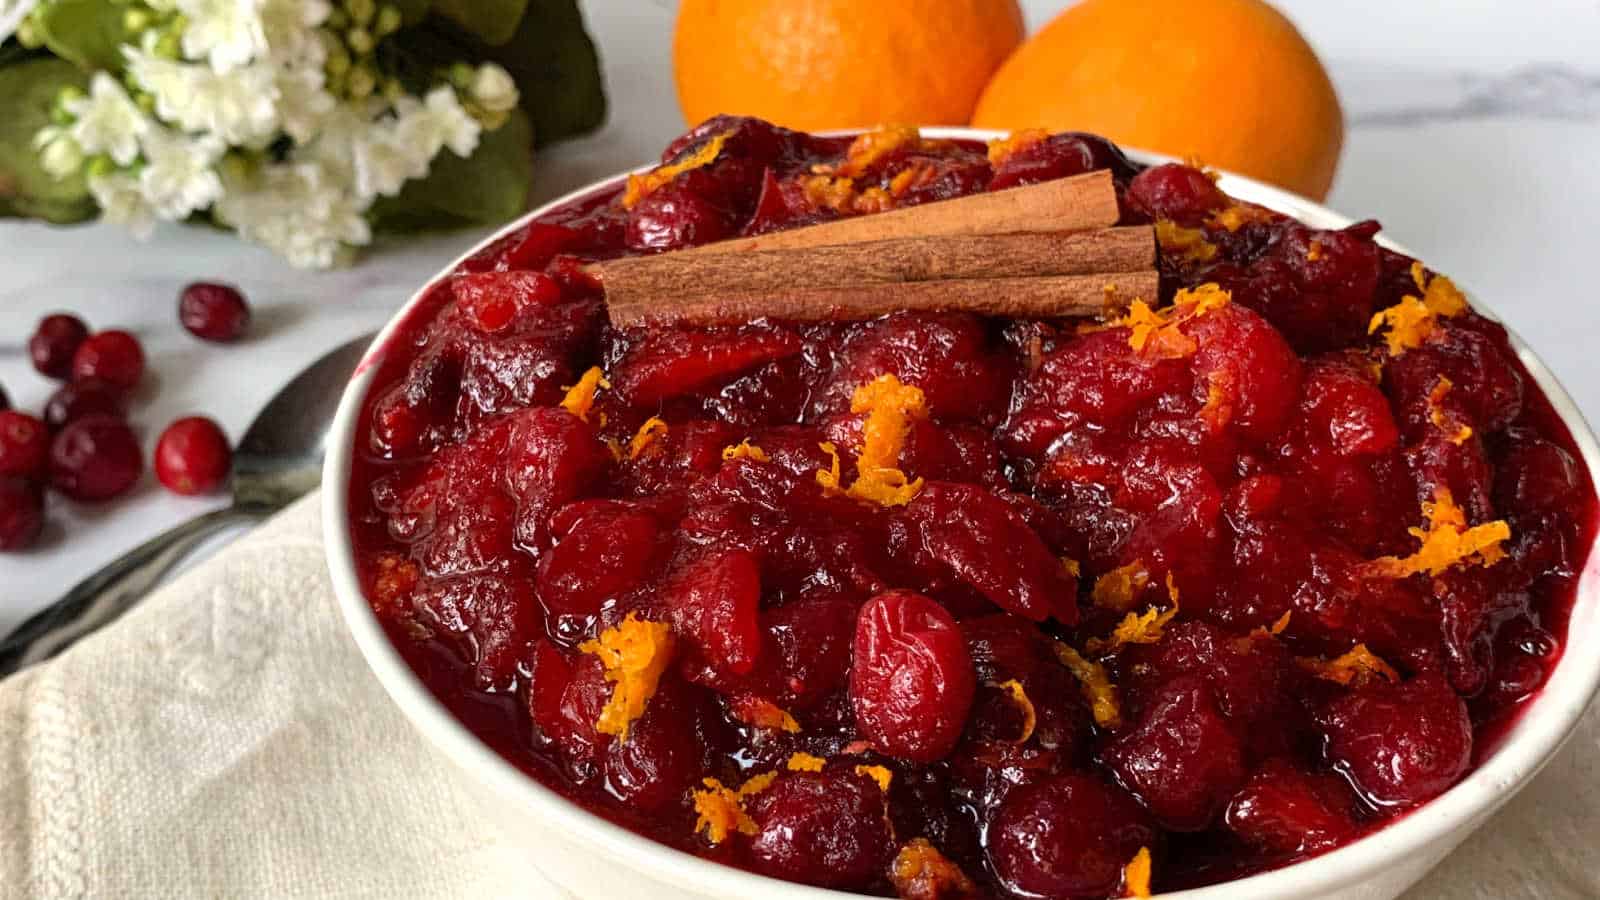 A bowl of cranberry sauce with oranges and cinnamon.